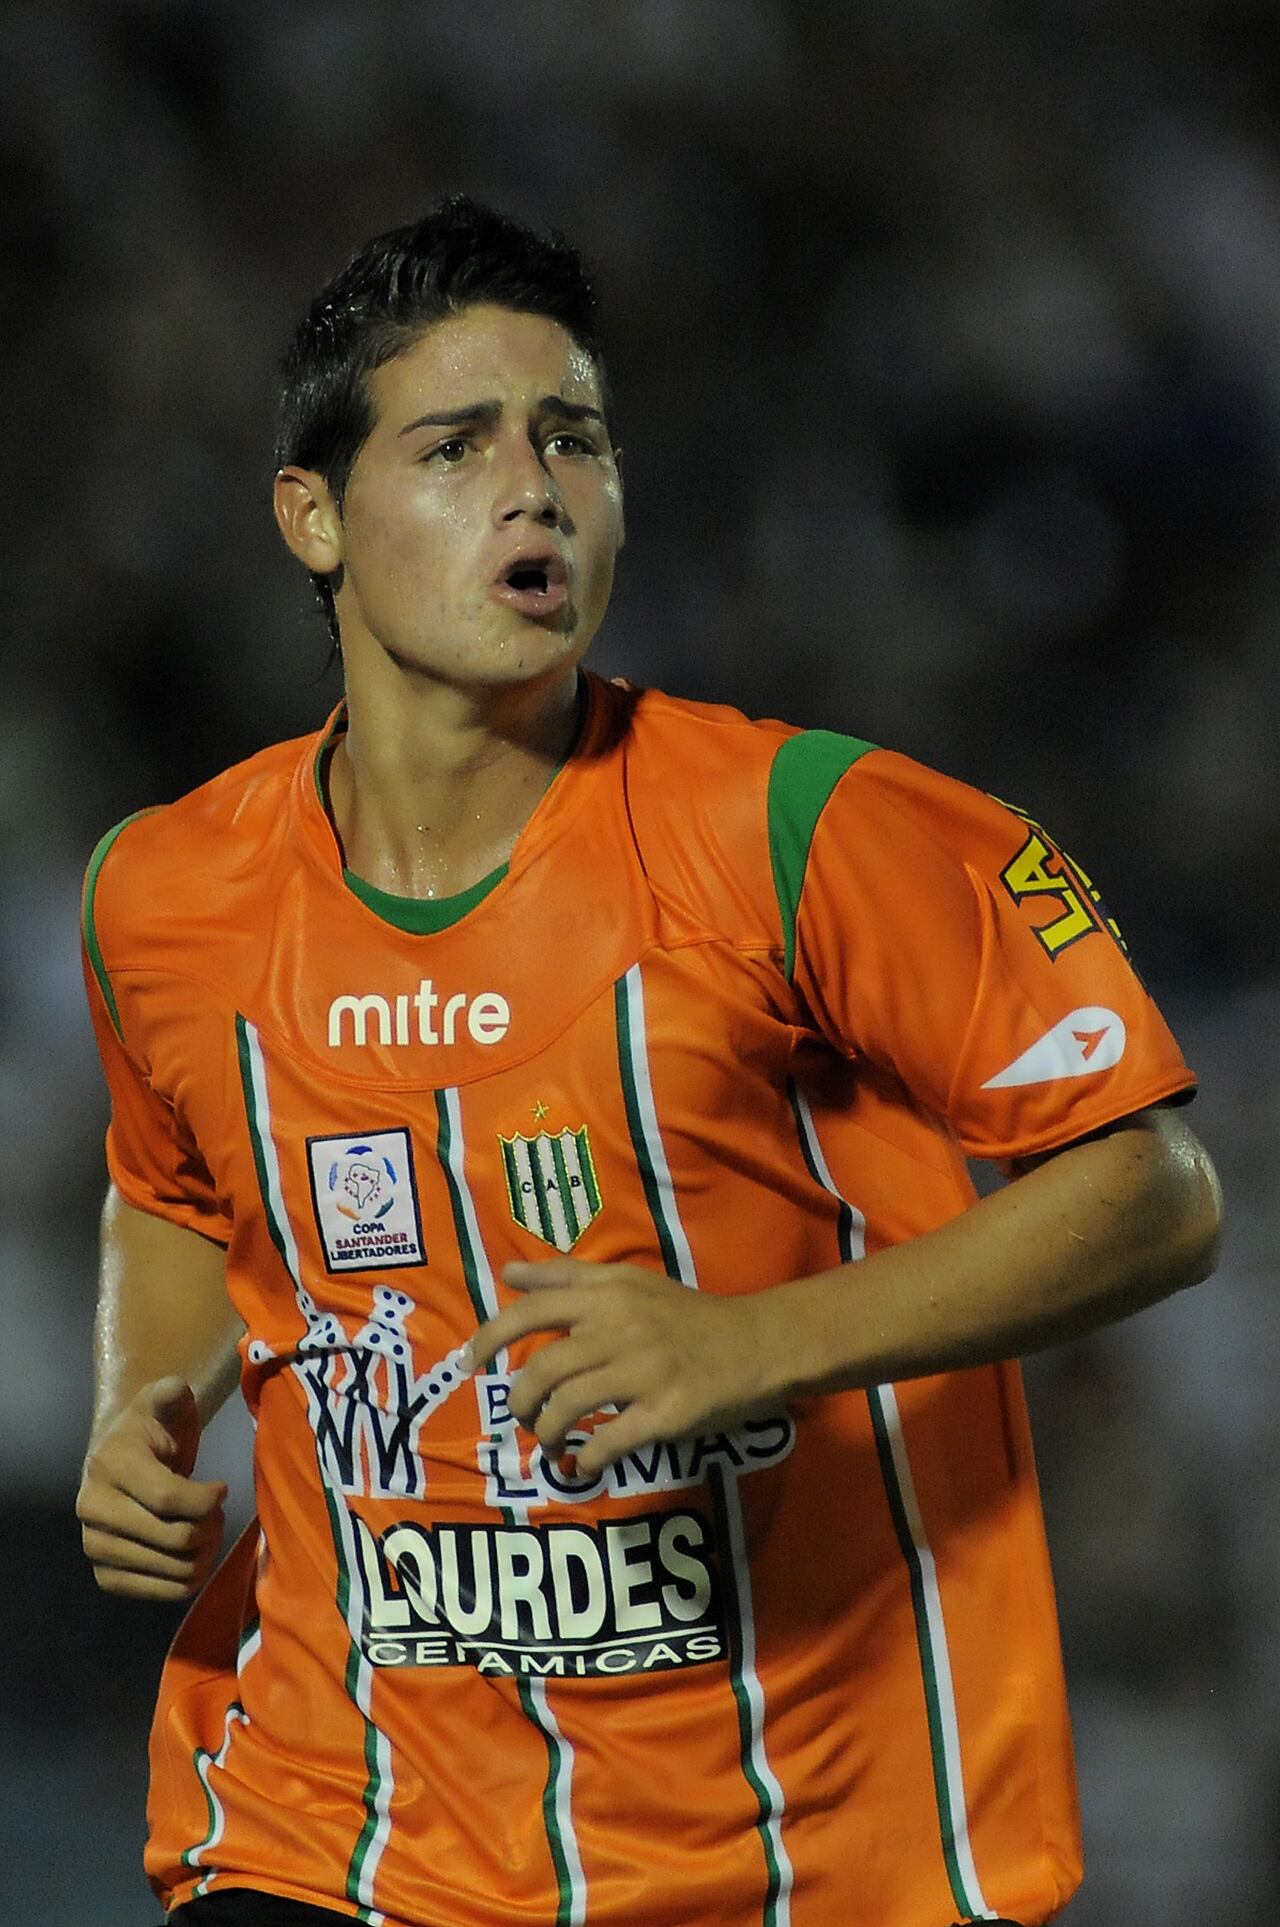 MONTEVIDEO, URUGUAY ? MARCH 10:  James Rodriguez of Argentina?s Banfield celebrates scored goal against Uruguay?s Nacional during a match as part of the Santander Libertadores Cup 2010 at the Centenary Stadium on March 10, 2010 in Montevideo, Uruguay. (Photo by Dante Fernandez/LatinContent via Getty Images)